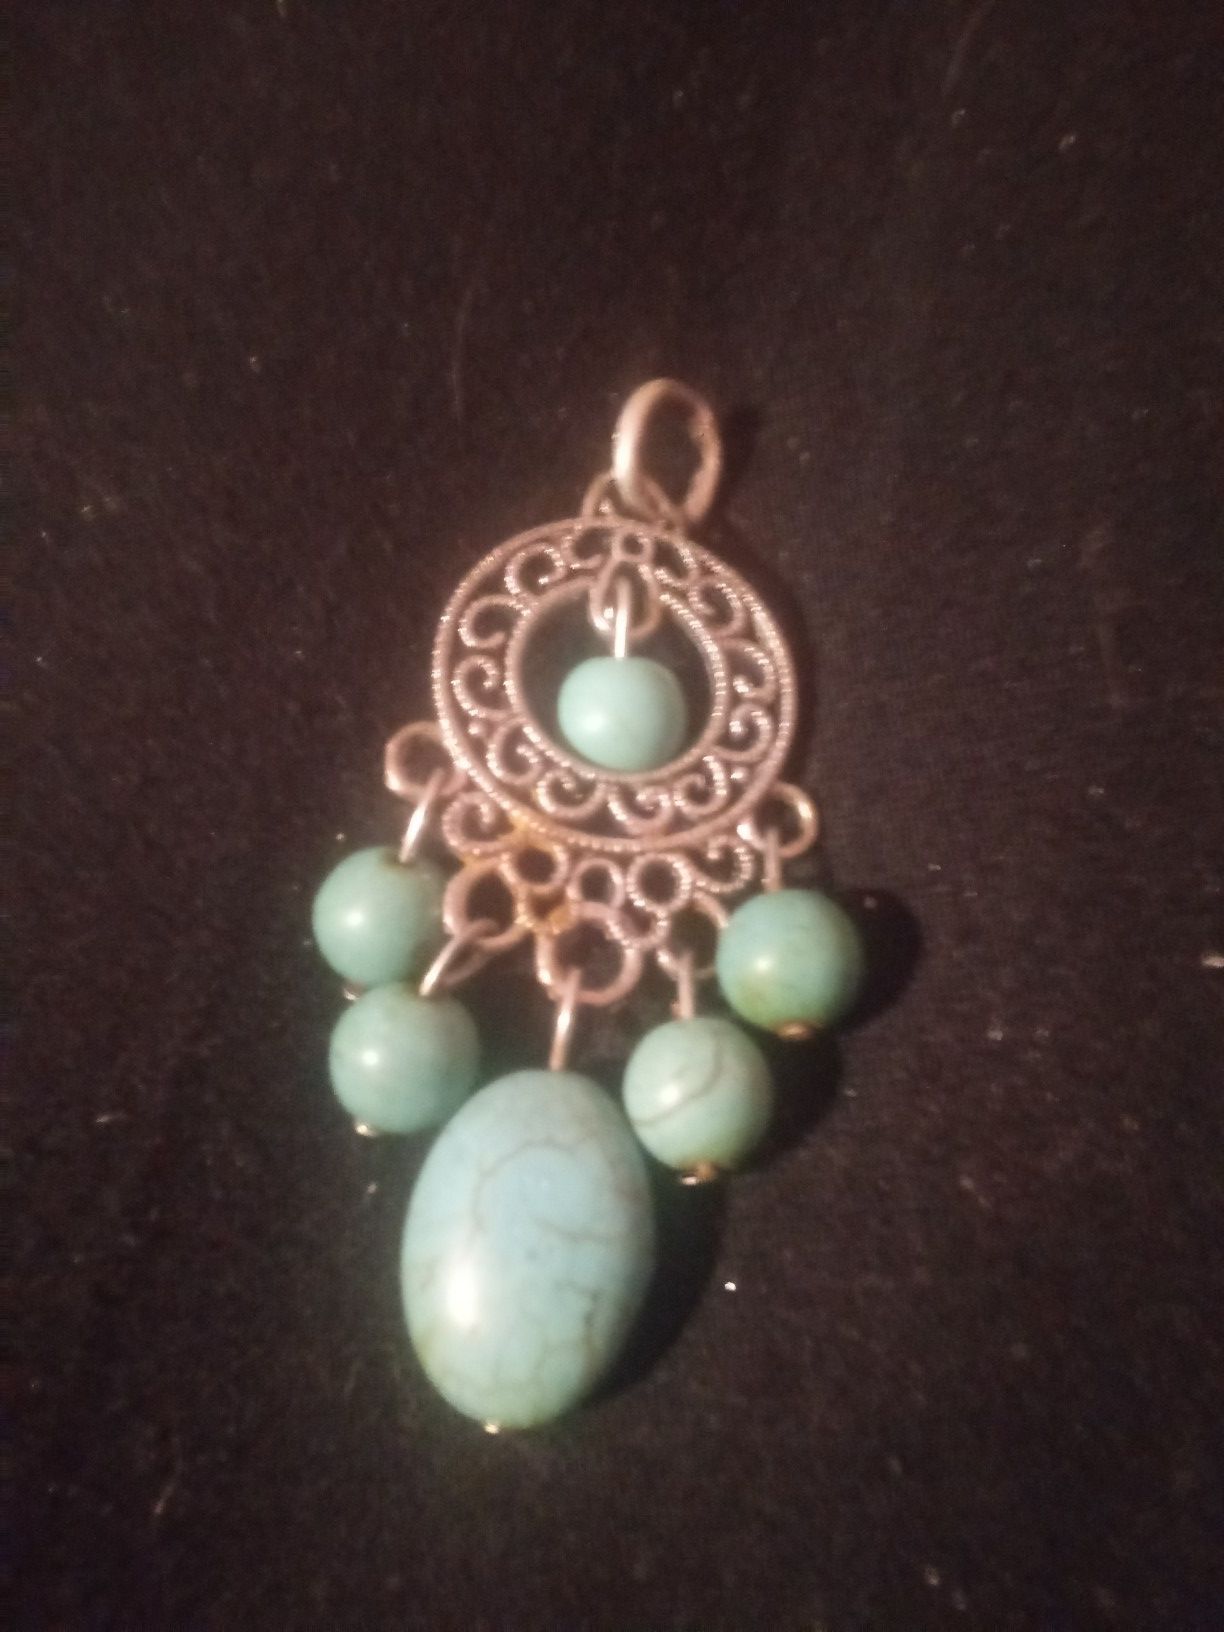 Silver and turquoise charm